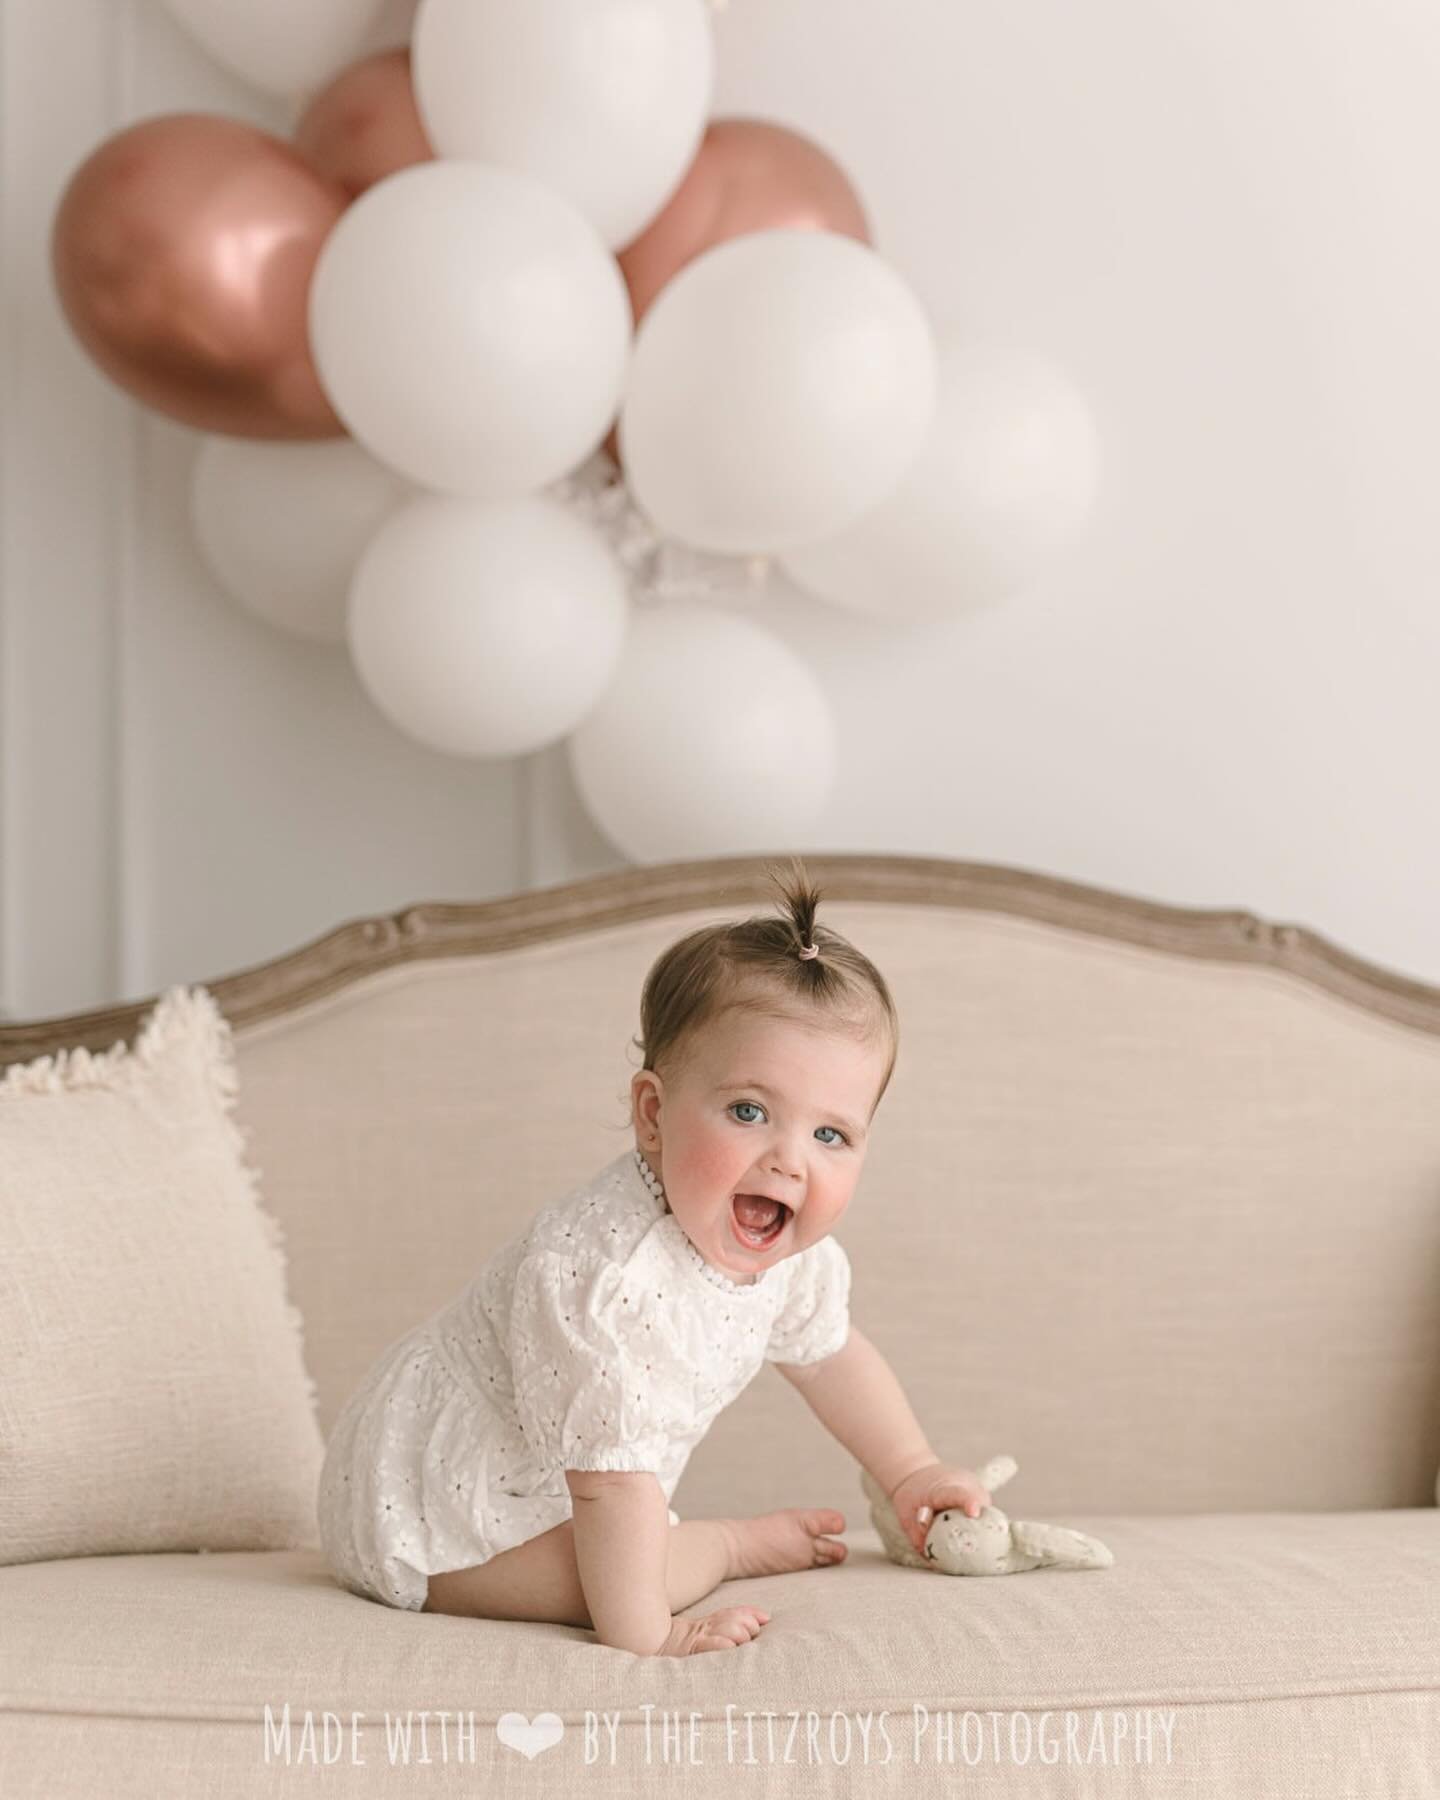 And it went by like this ✨ 

Little Sophie is turning ONE🎈 

Gorgeous girl at her birthday portrait session and a little flashback to one year ago 🥹 

&hearts;︎

Melbourne Maternity, Newborn &amp; Baby Photographer / Family-centred sessions / Mothe